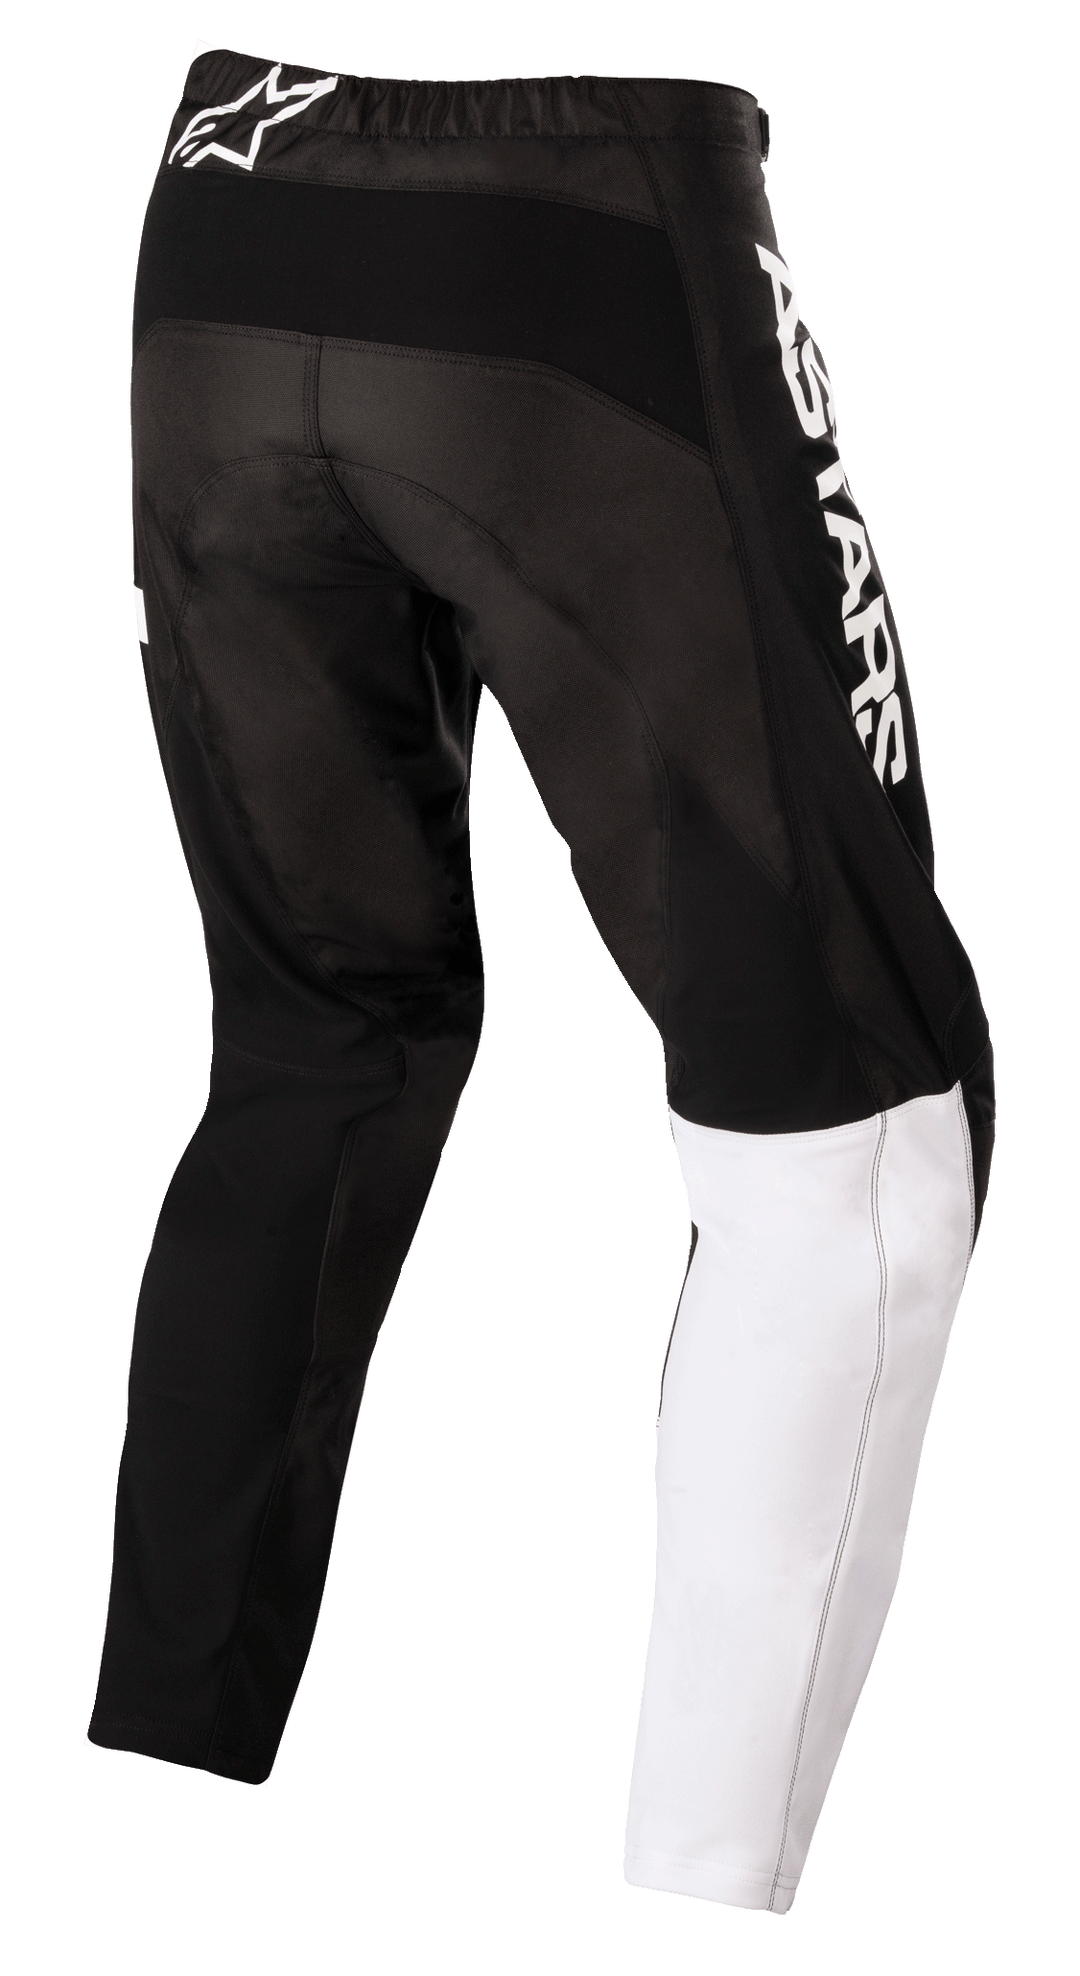 Youth Racer Chaser Pants